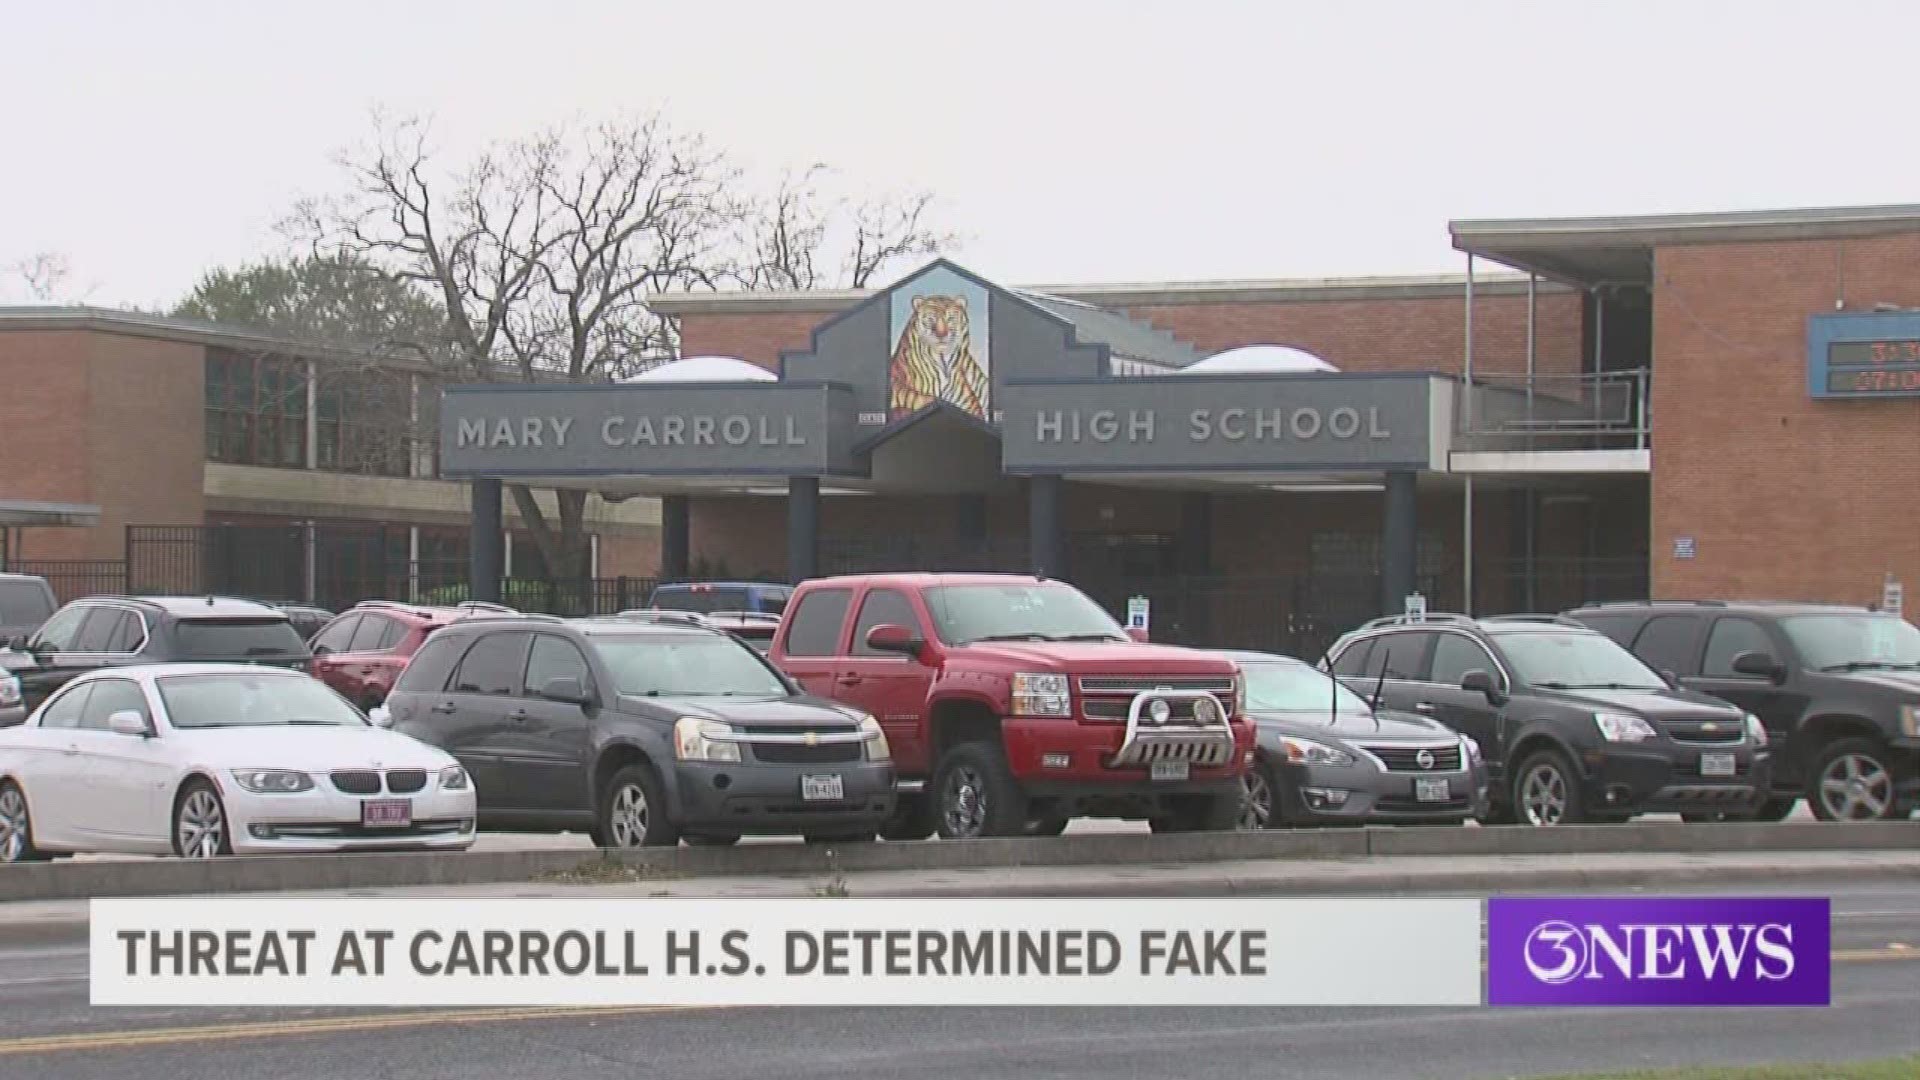 The principal of Carroll High School posted a notice on the school Facebook page Wednesday to report a threat that was made against the campus.